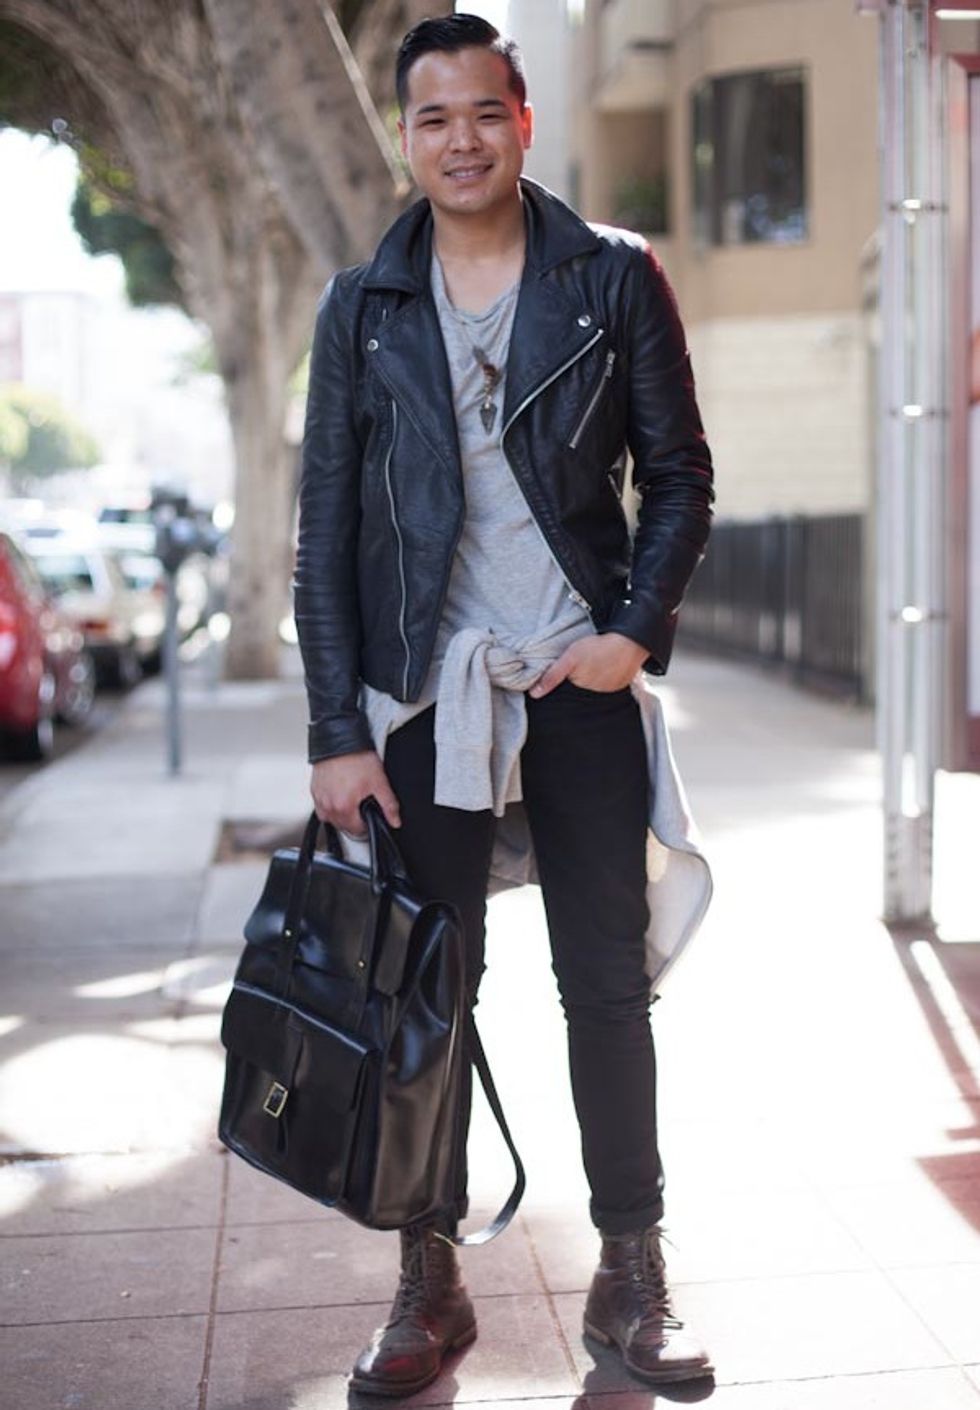 Street Style Report: A Sleek Spring Look in Western Addition